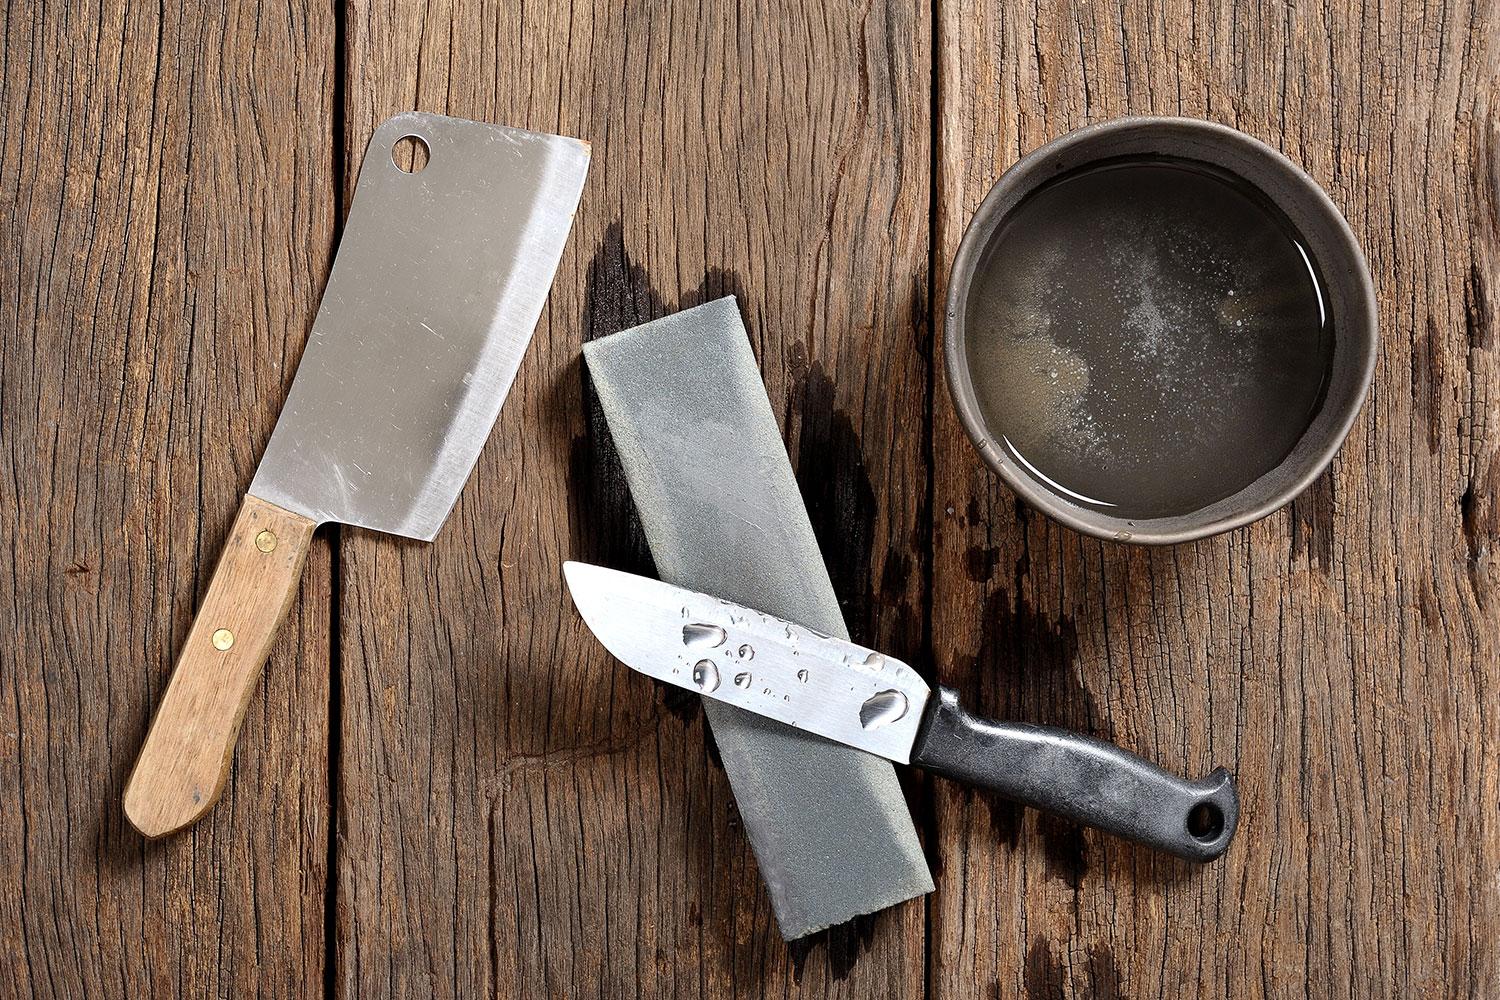 How to keep your knives dangerously sharp